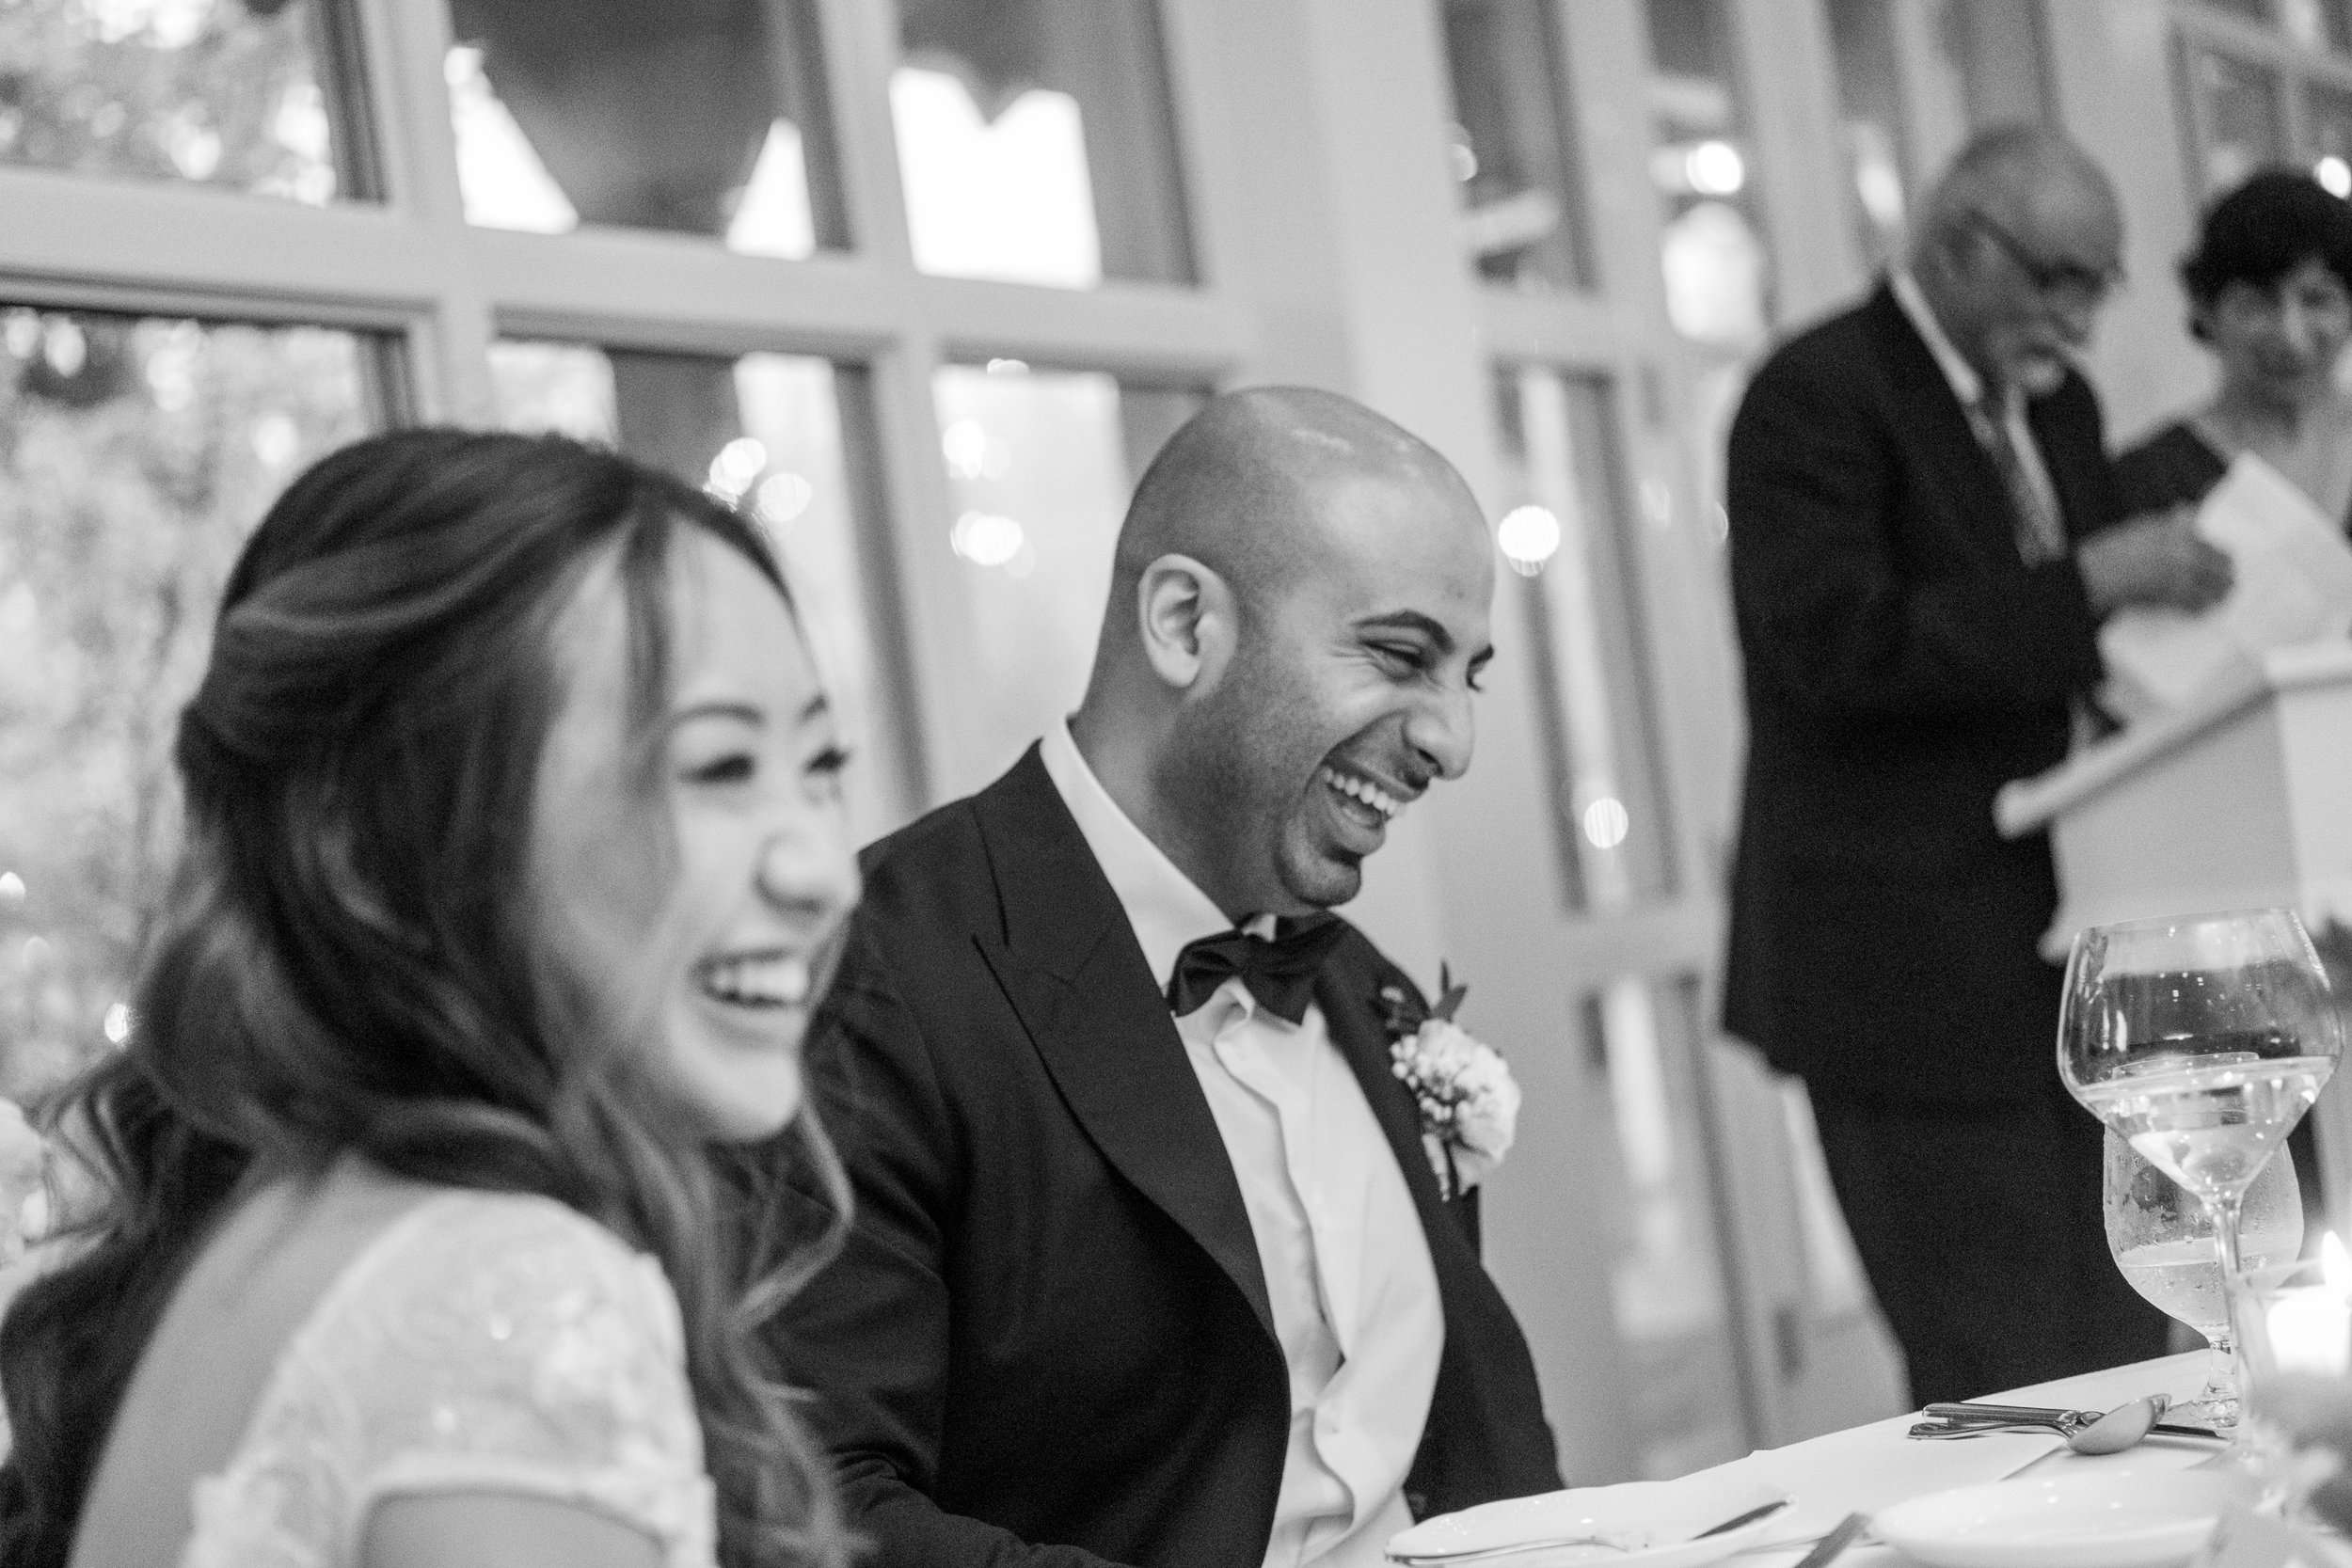  A black and white candid wedding photograph of the wedding couple laughing during a toast during the reception at Tiffany + Zoubin’s wedding at Langdon Hall by Toronto Wedding Photographer Scott Williams  